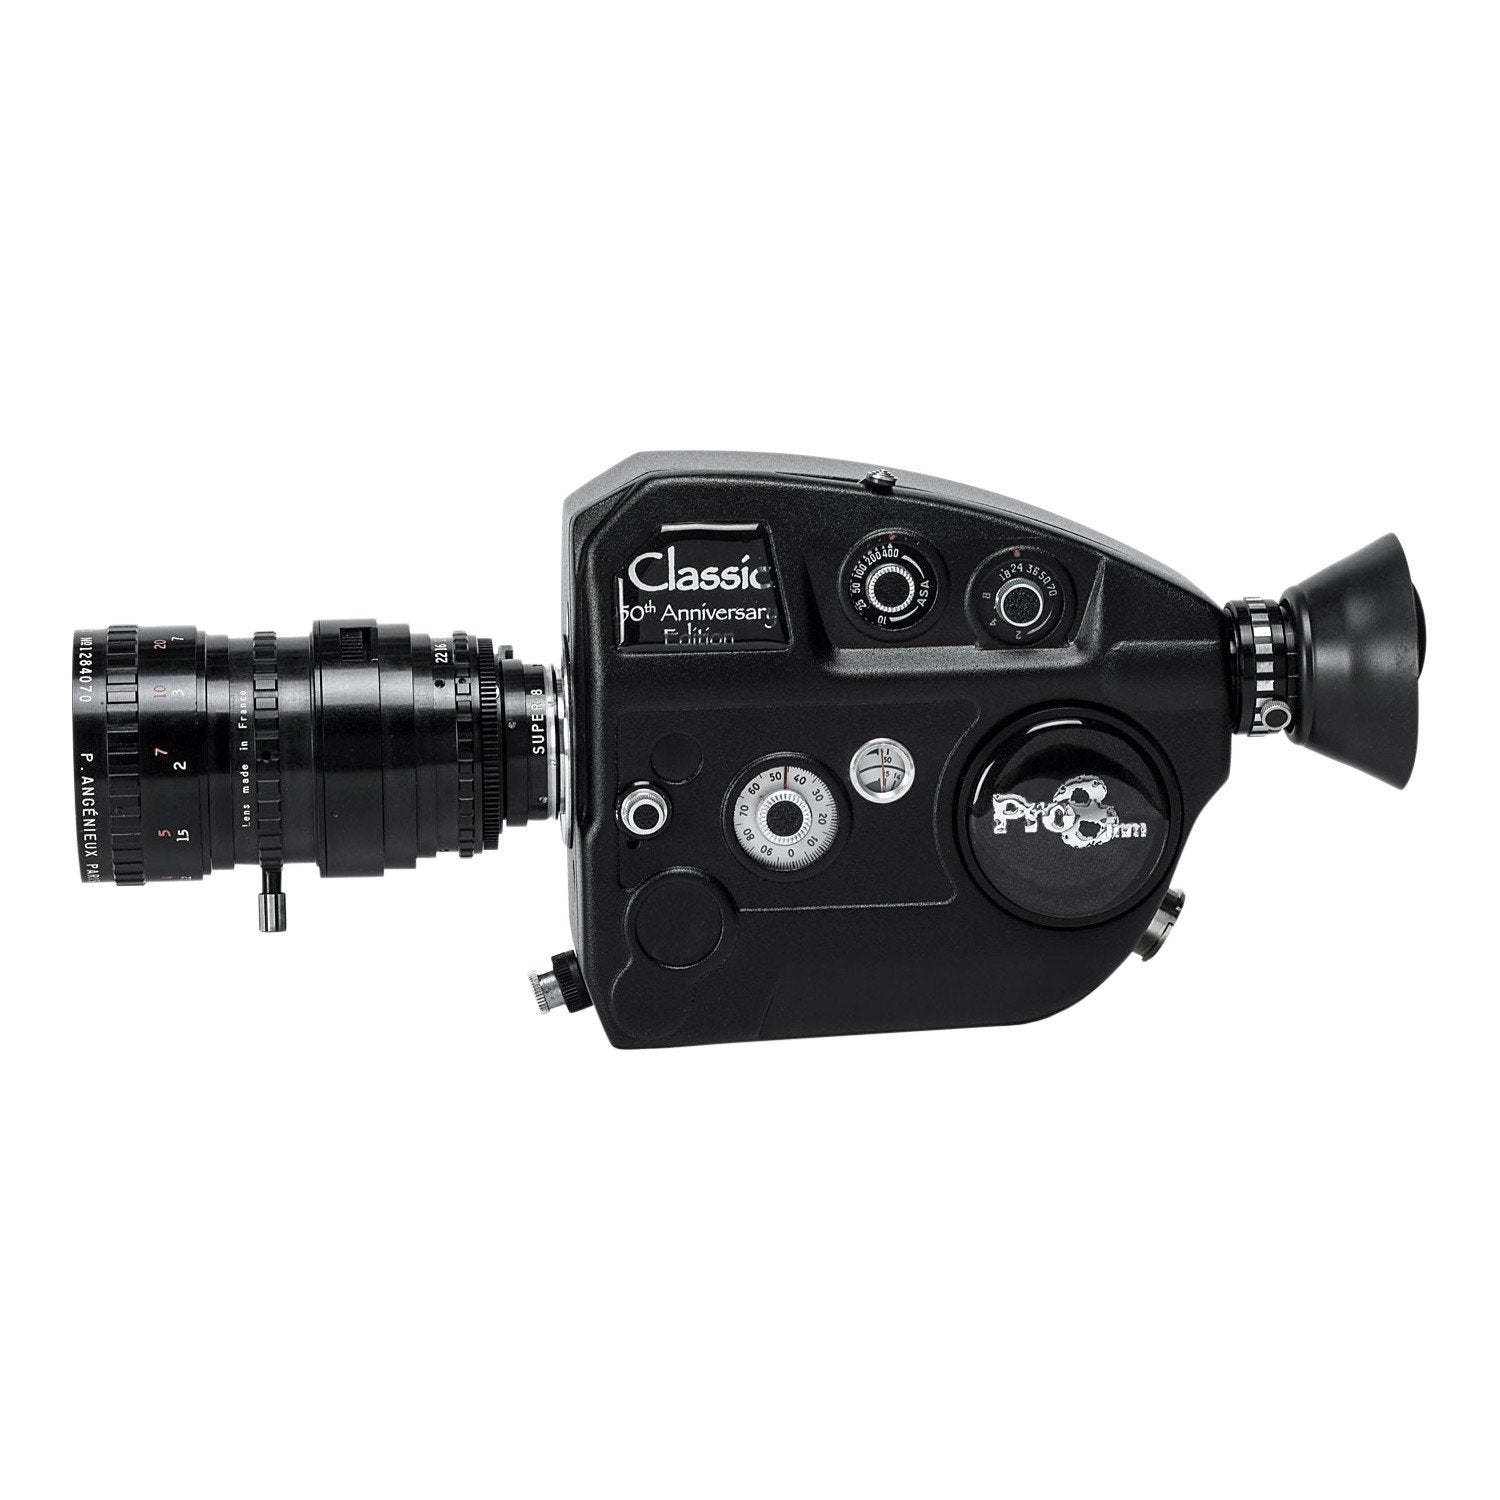 Super 8 Camera Rental: Classic Pro with 8-64mm Angenieux Lens, Max 8 & –  Pro8mm